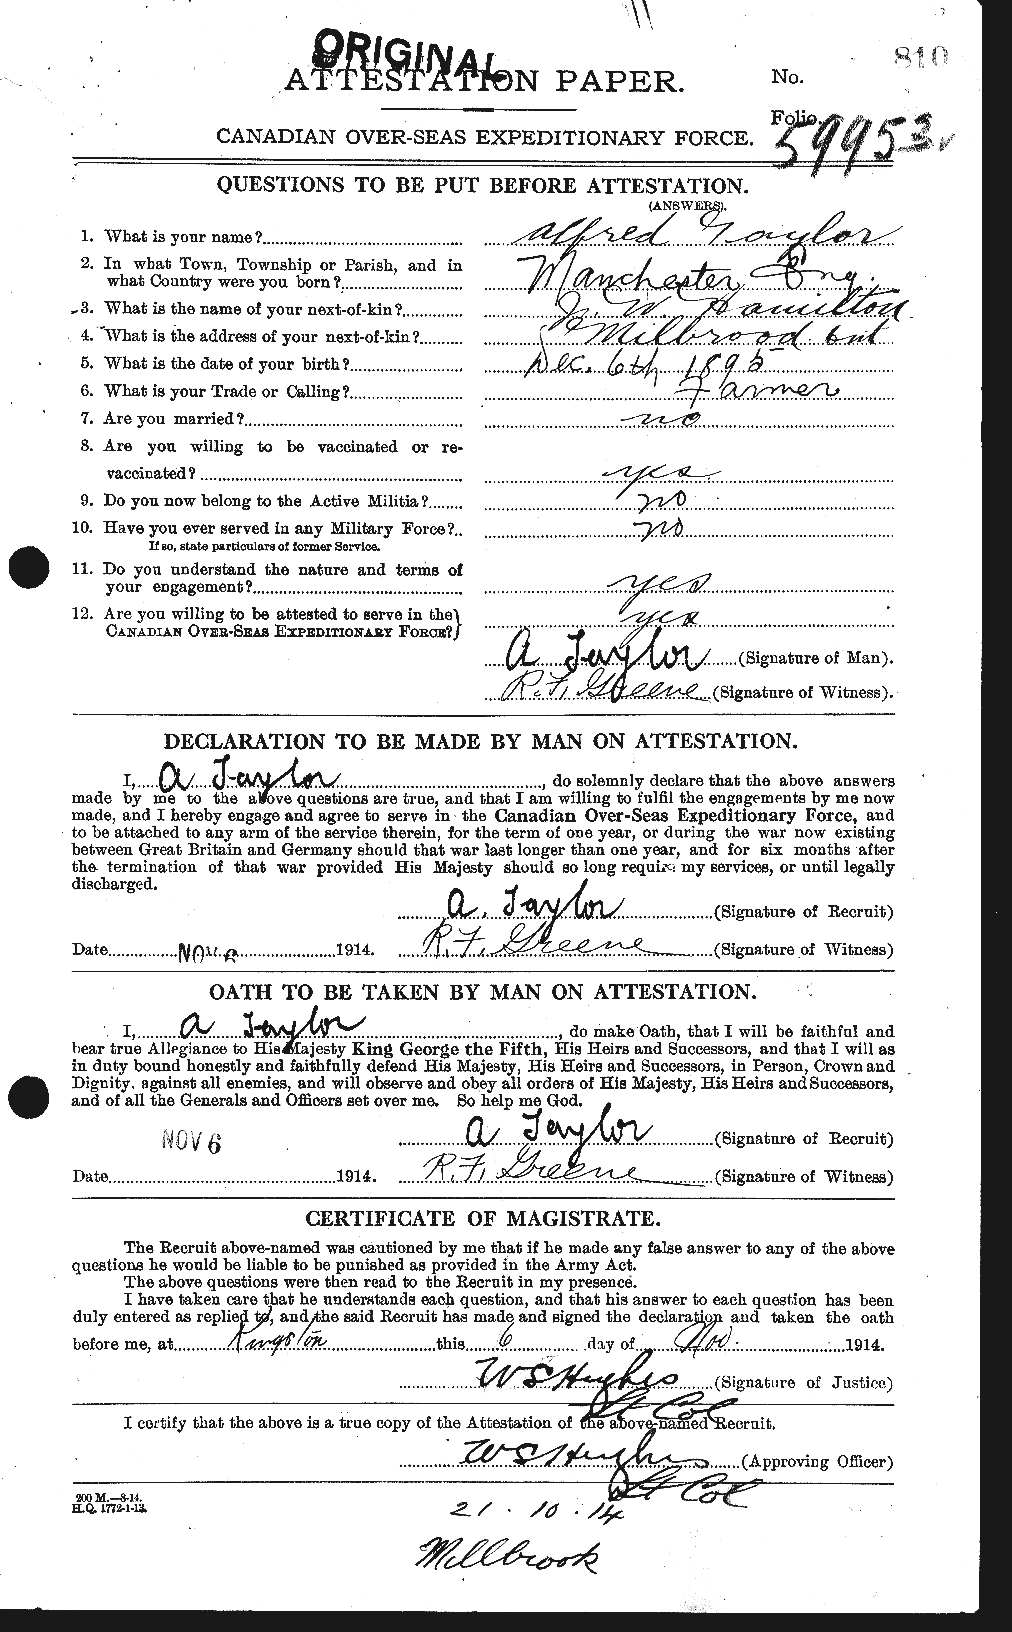 Personnel Records of the First World War - CEF 626160a